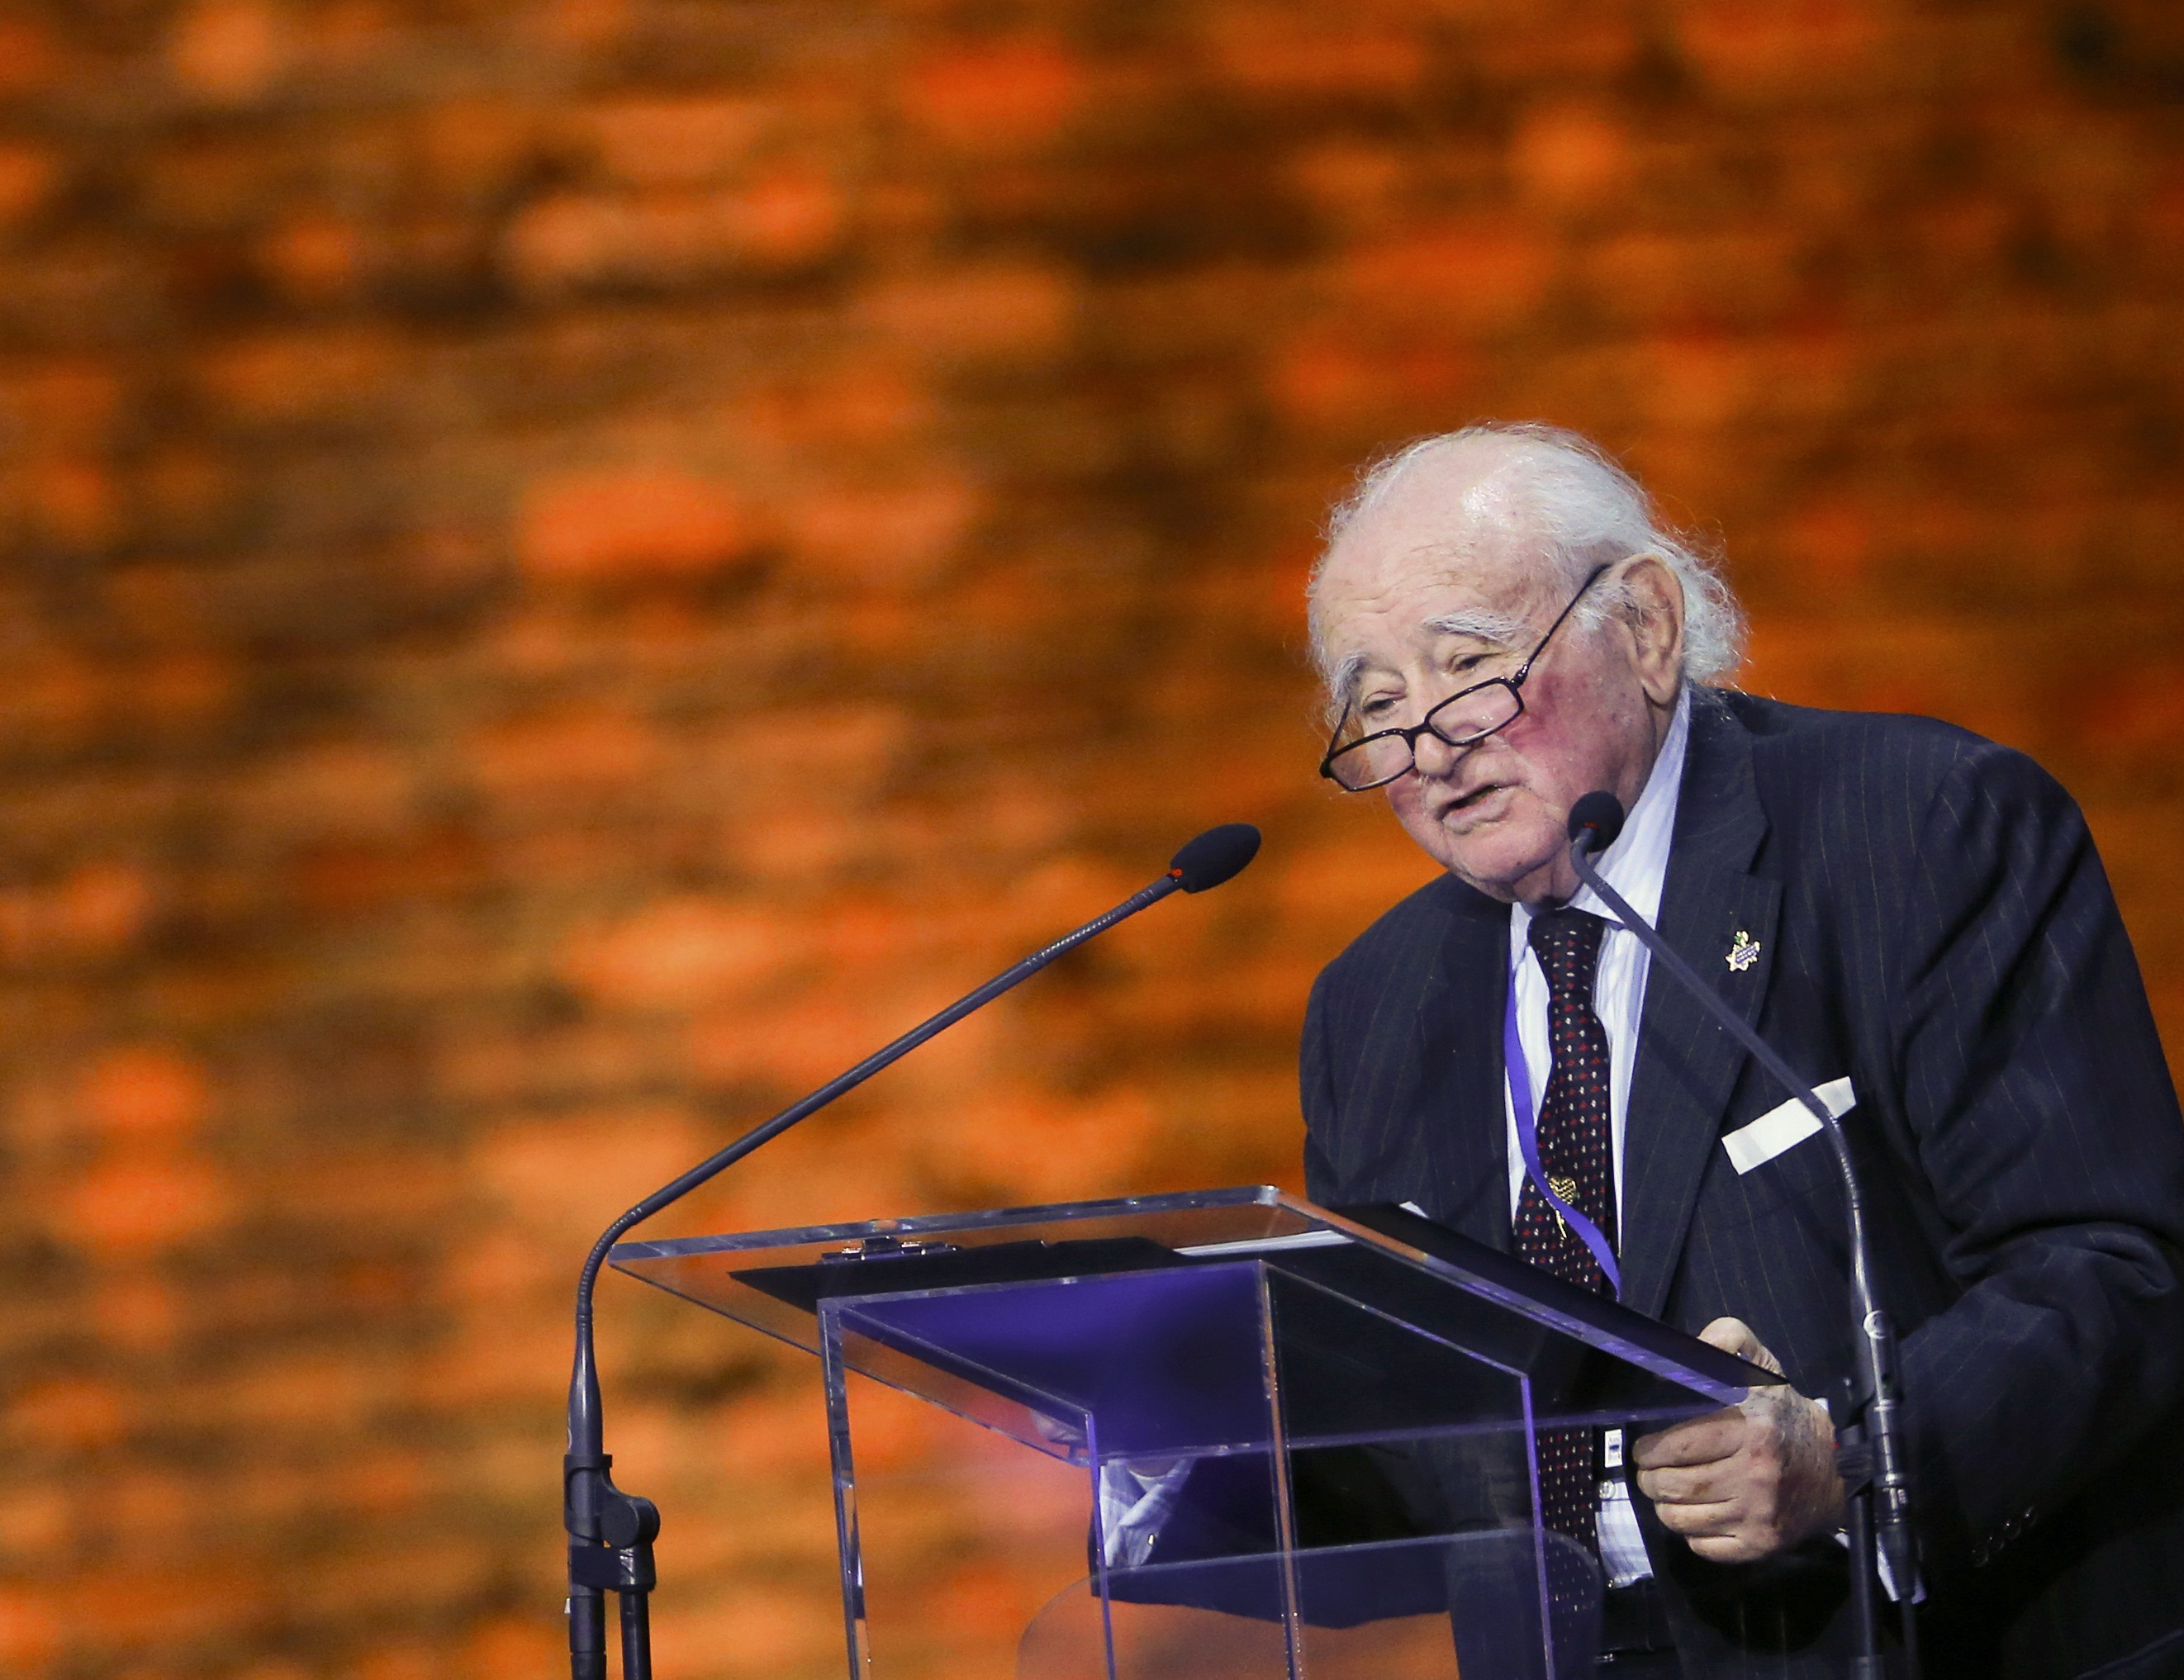 Survivor Roman Kent makes a speech at a ceremony on the site of the former Nazi German concentration and extermination camp Auschwitz-Birkenau near Oswiecim January 27, 2015. Ceremonies to mark the 70th anniversary of the liberation of the camp take place on January 27, with some 300 former Auschwitz prisoners taking part in the commemoration event. Nazi Germany built the Auschwitz camp in 1940 as a place of incarceration for the Poles. From 1942, it became the largest site of extermination of the Jews from Europe. In Auschwitz, Nazis killed at least 1.1 million people, mainly Jews, but also Poles, Roma, Soviet prisoners of war and prisoners of other ethnicities. On January 27, 1945 the camp was liberated by the Red Army soldiers. REUTERS/Laszlo Balogh (POLAND - Tags: ANNIVERSARY SOCIETY CONFLICT)